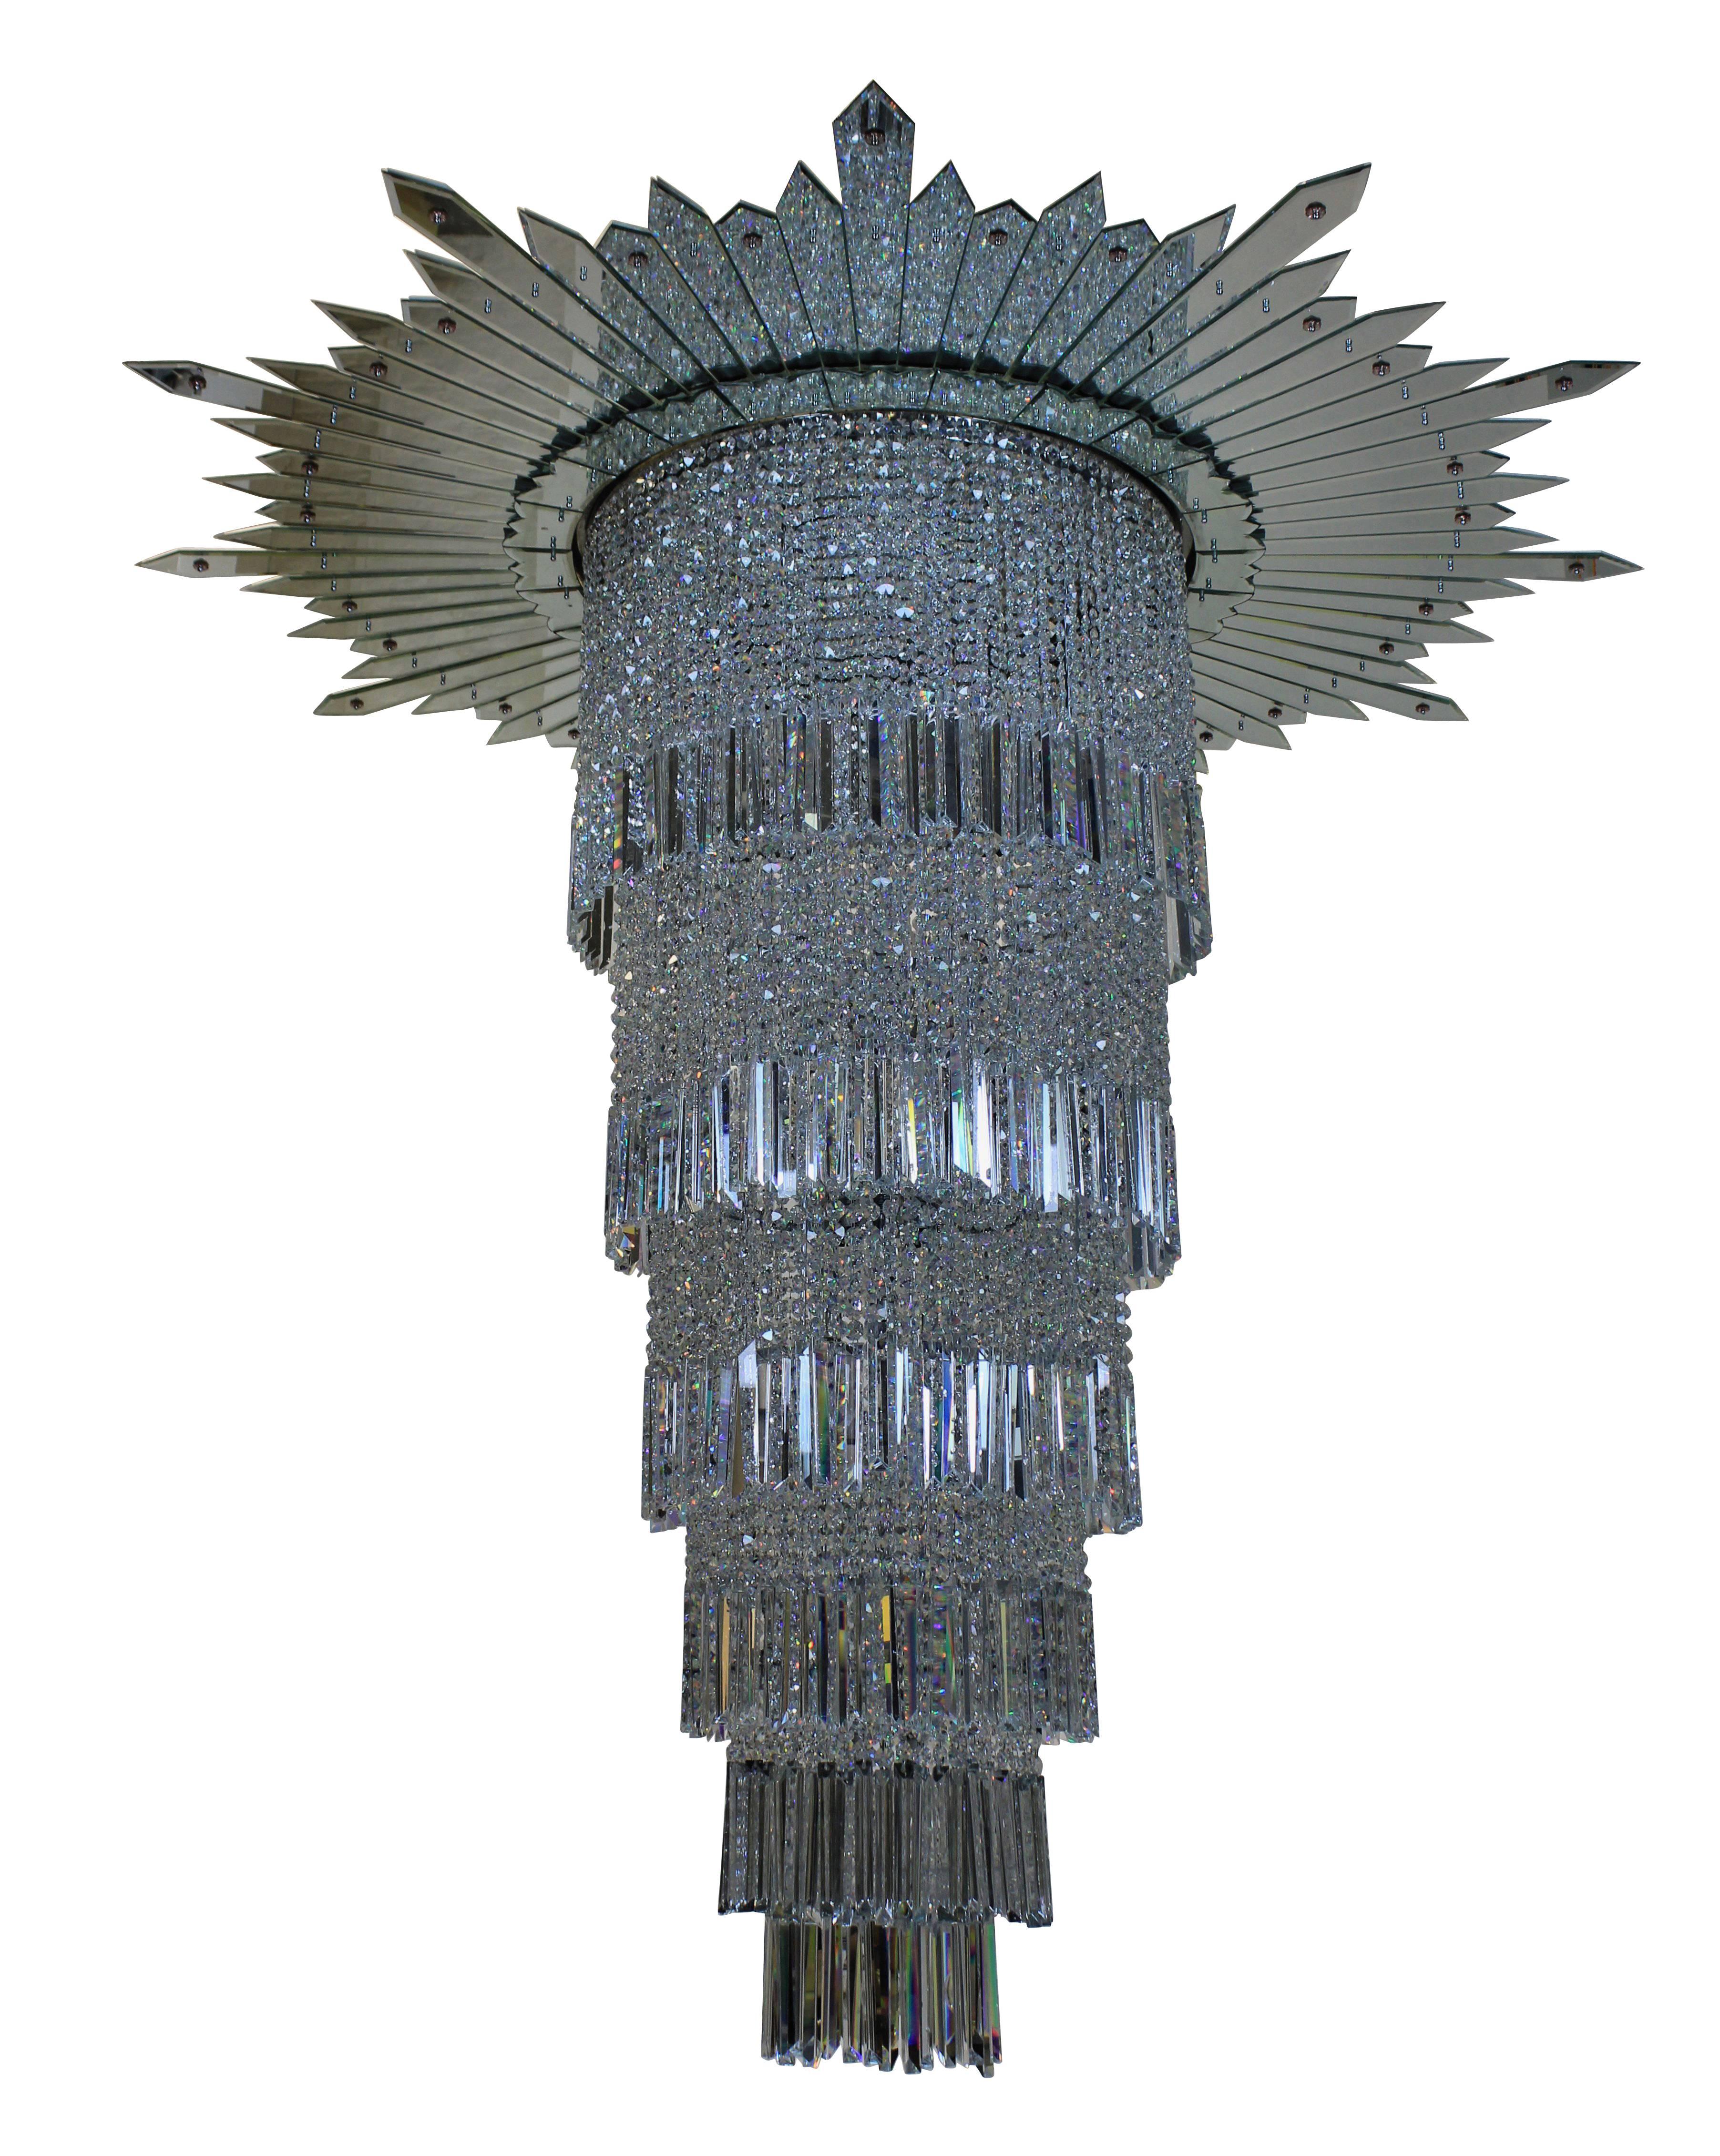 The Aldelphi building chandelier was designed in 1931 for the Adelphi hotel on the strand, London, completed in 1938. The hotel was built on the site of Robert Adams famous Adelphi building. This chandelier was the main light fitting in the entire